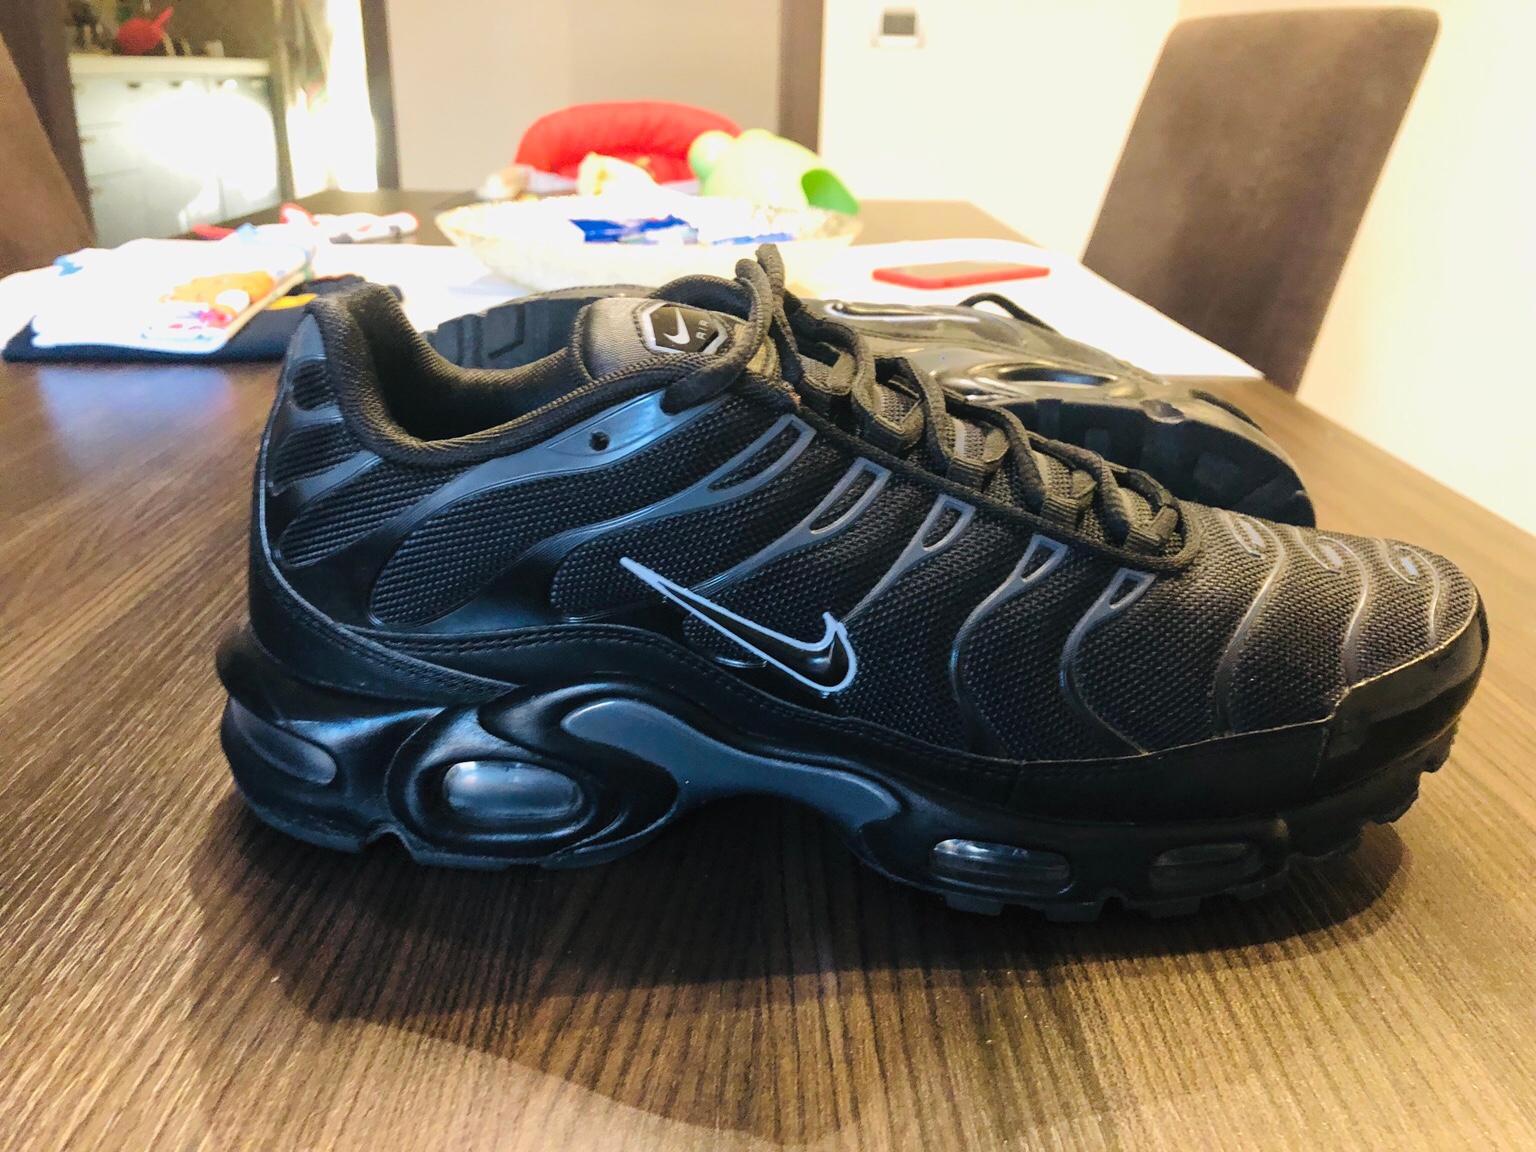 Nike Squalo TN PLUS in 00132 Roma for €75.00 for sale | Shpock